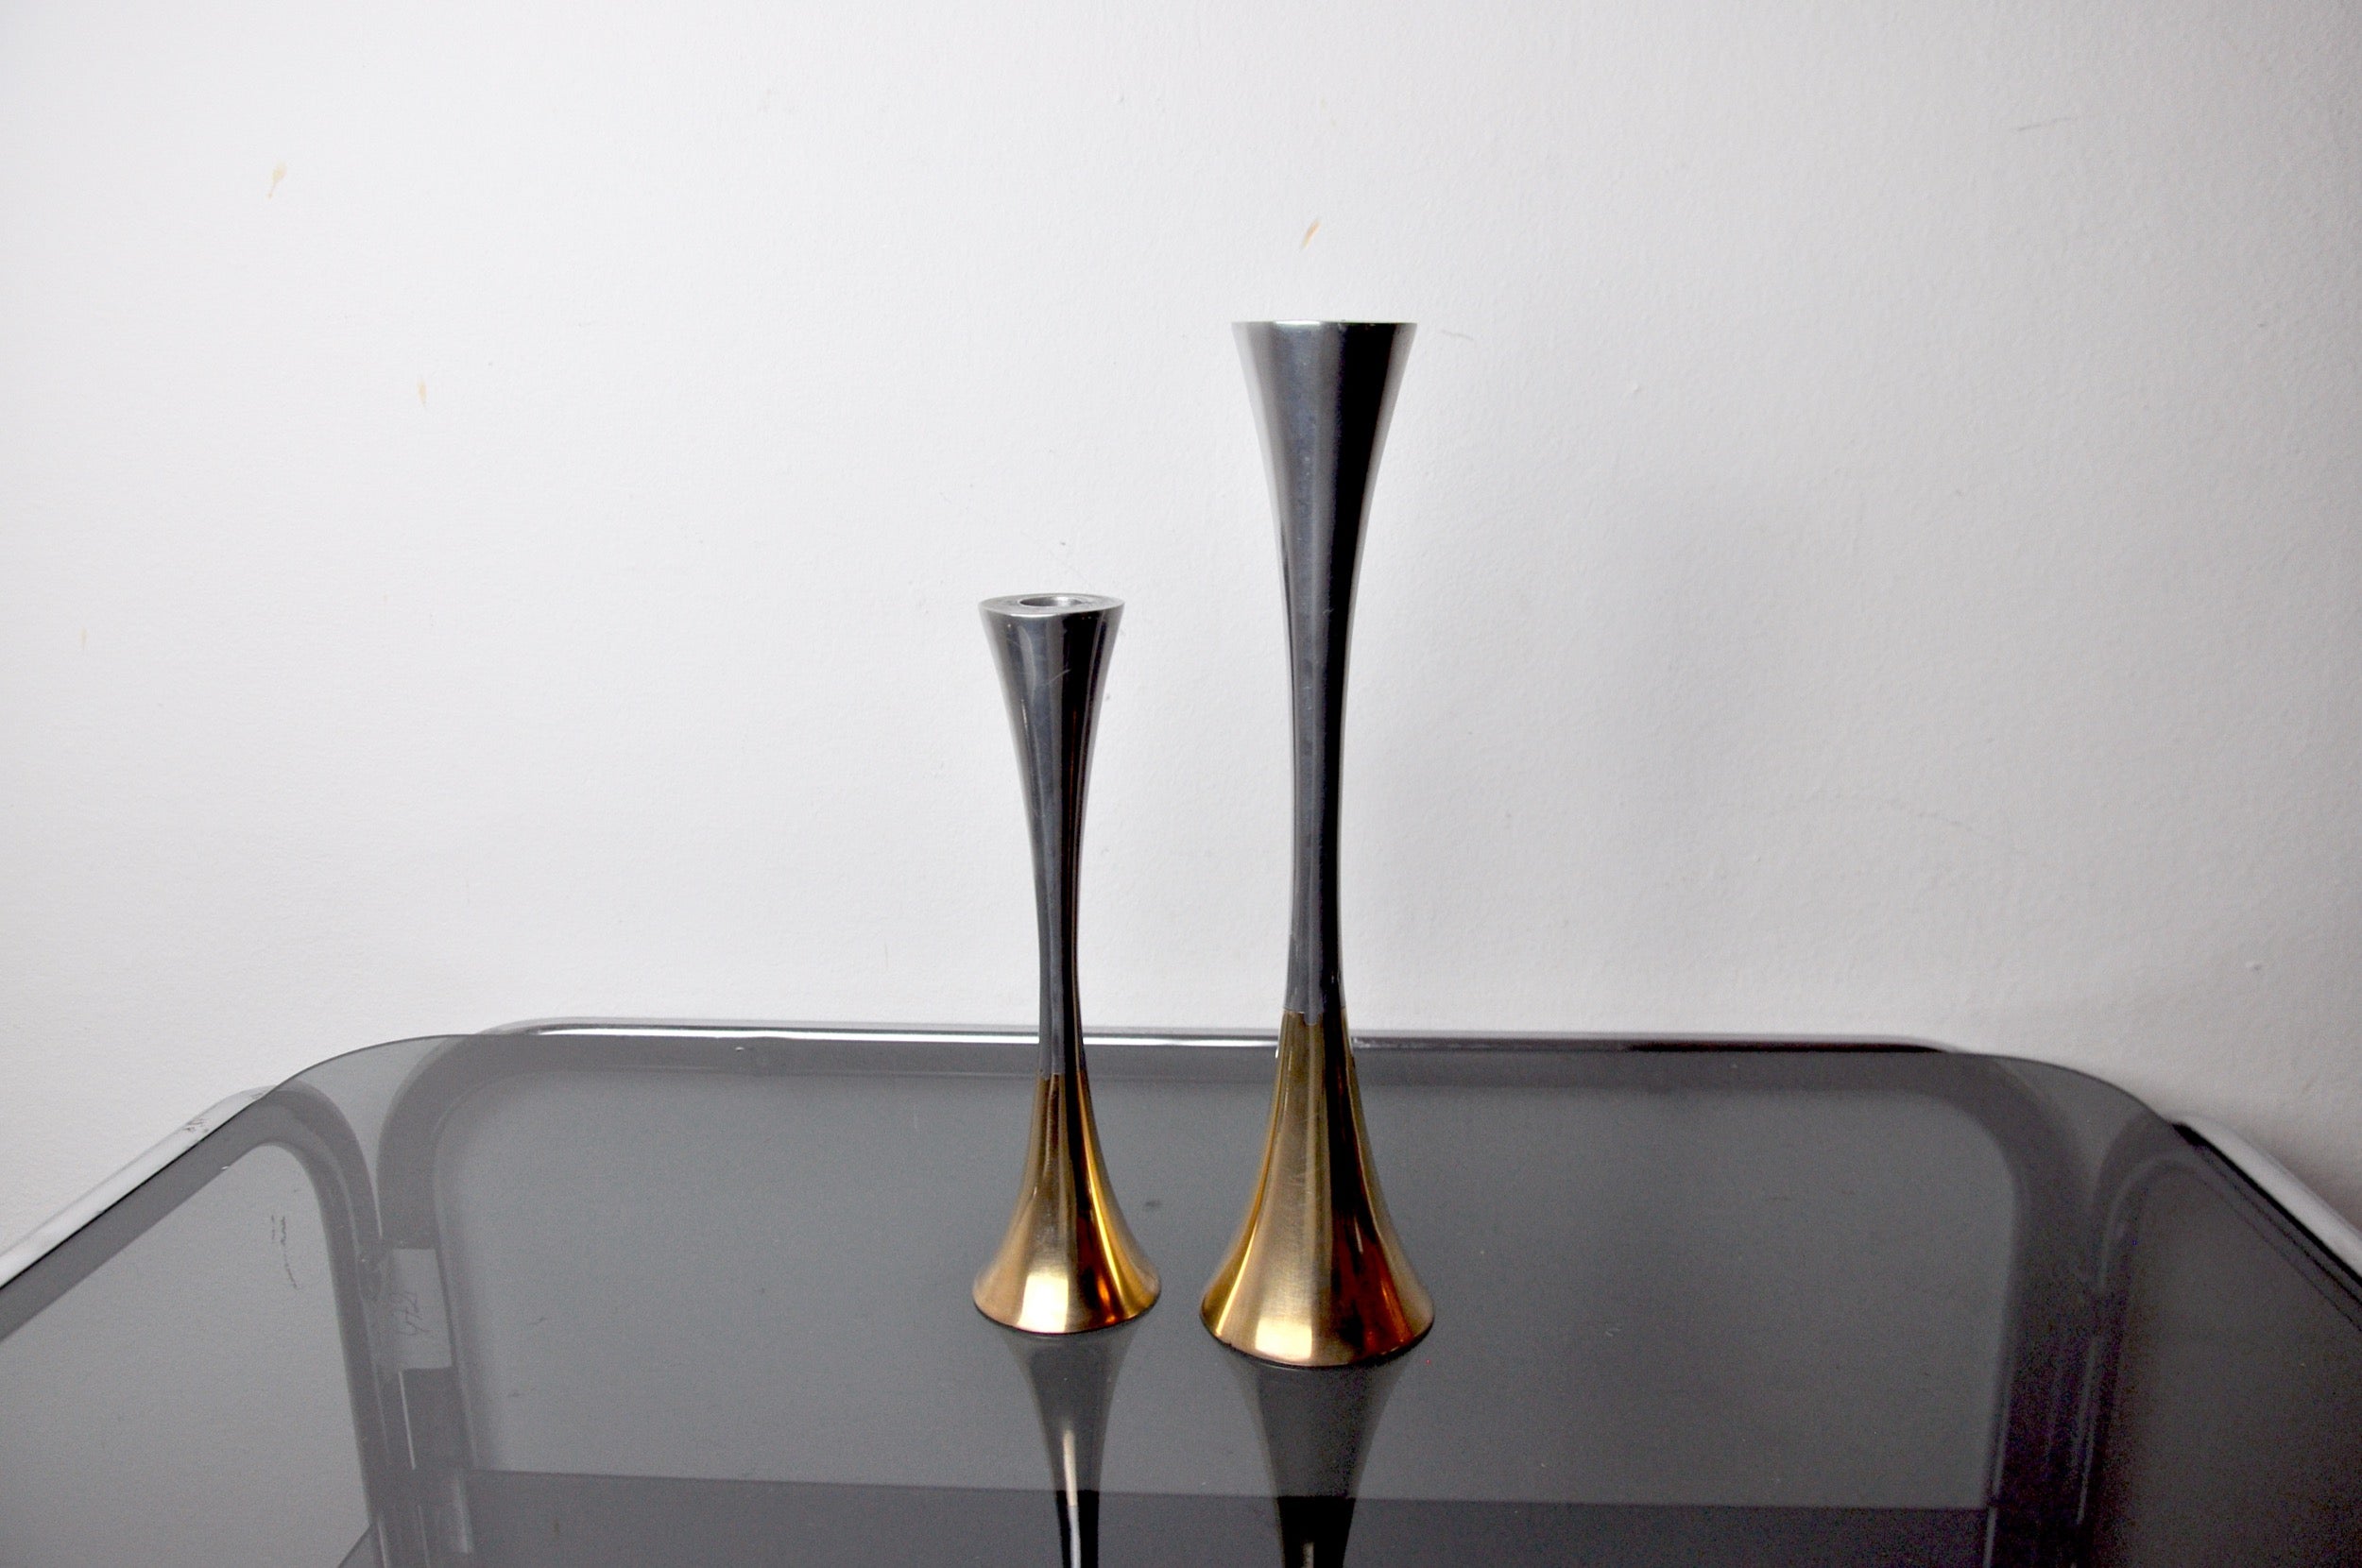 Rare and superb pair of Brutalist candlesticks designed and made by the artist David Marshall in the 80s, Spain.
Structure in brass and aluminium.
A true work of art and design object that will decorate your home perfectly.
Time ref: 893.
Candle